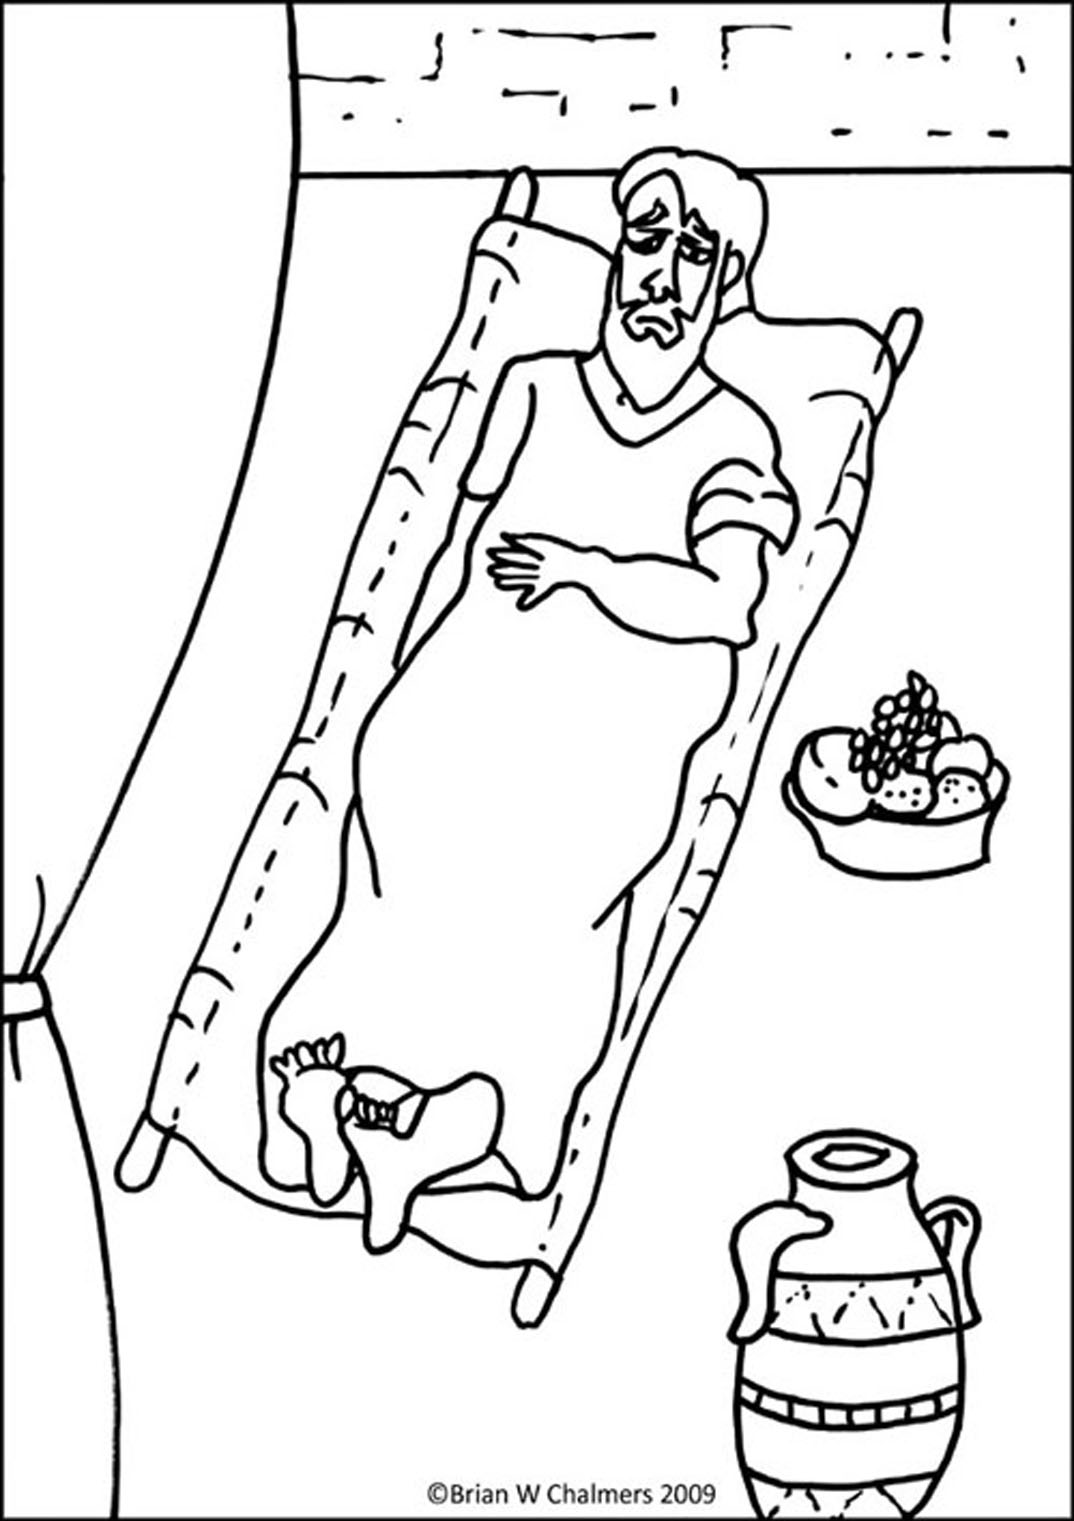 Coloring Page of Paralyzed Man